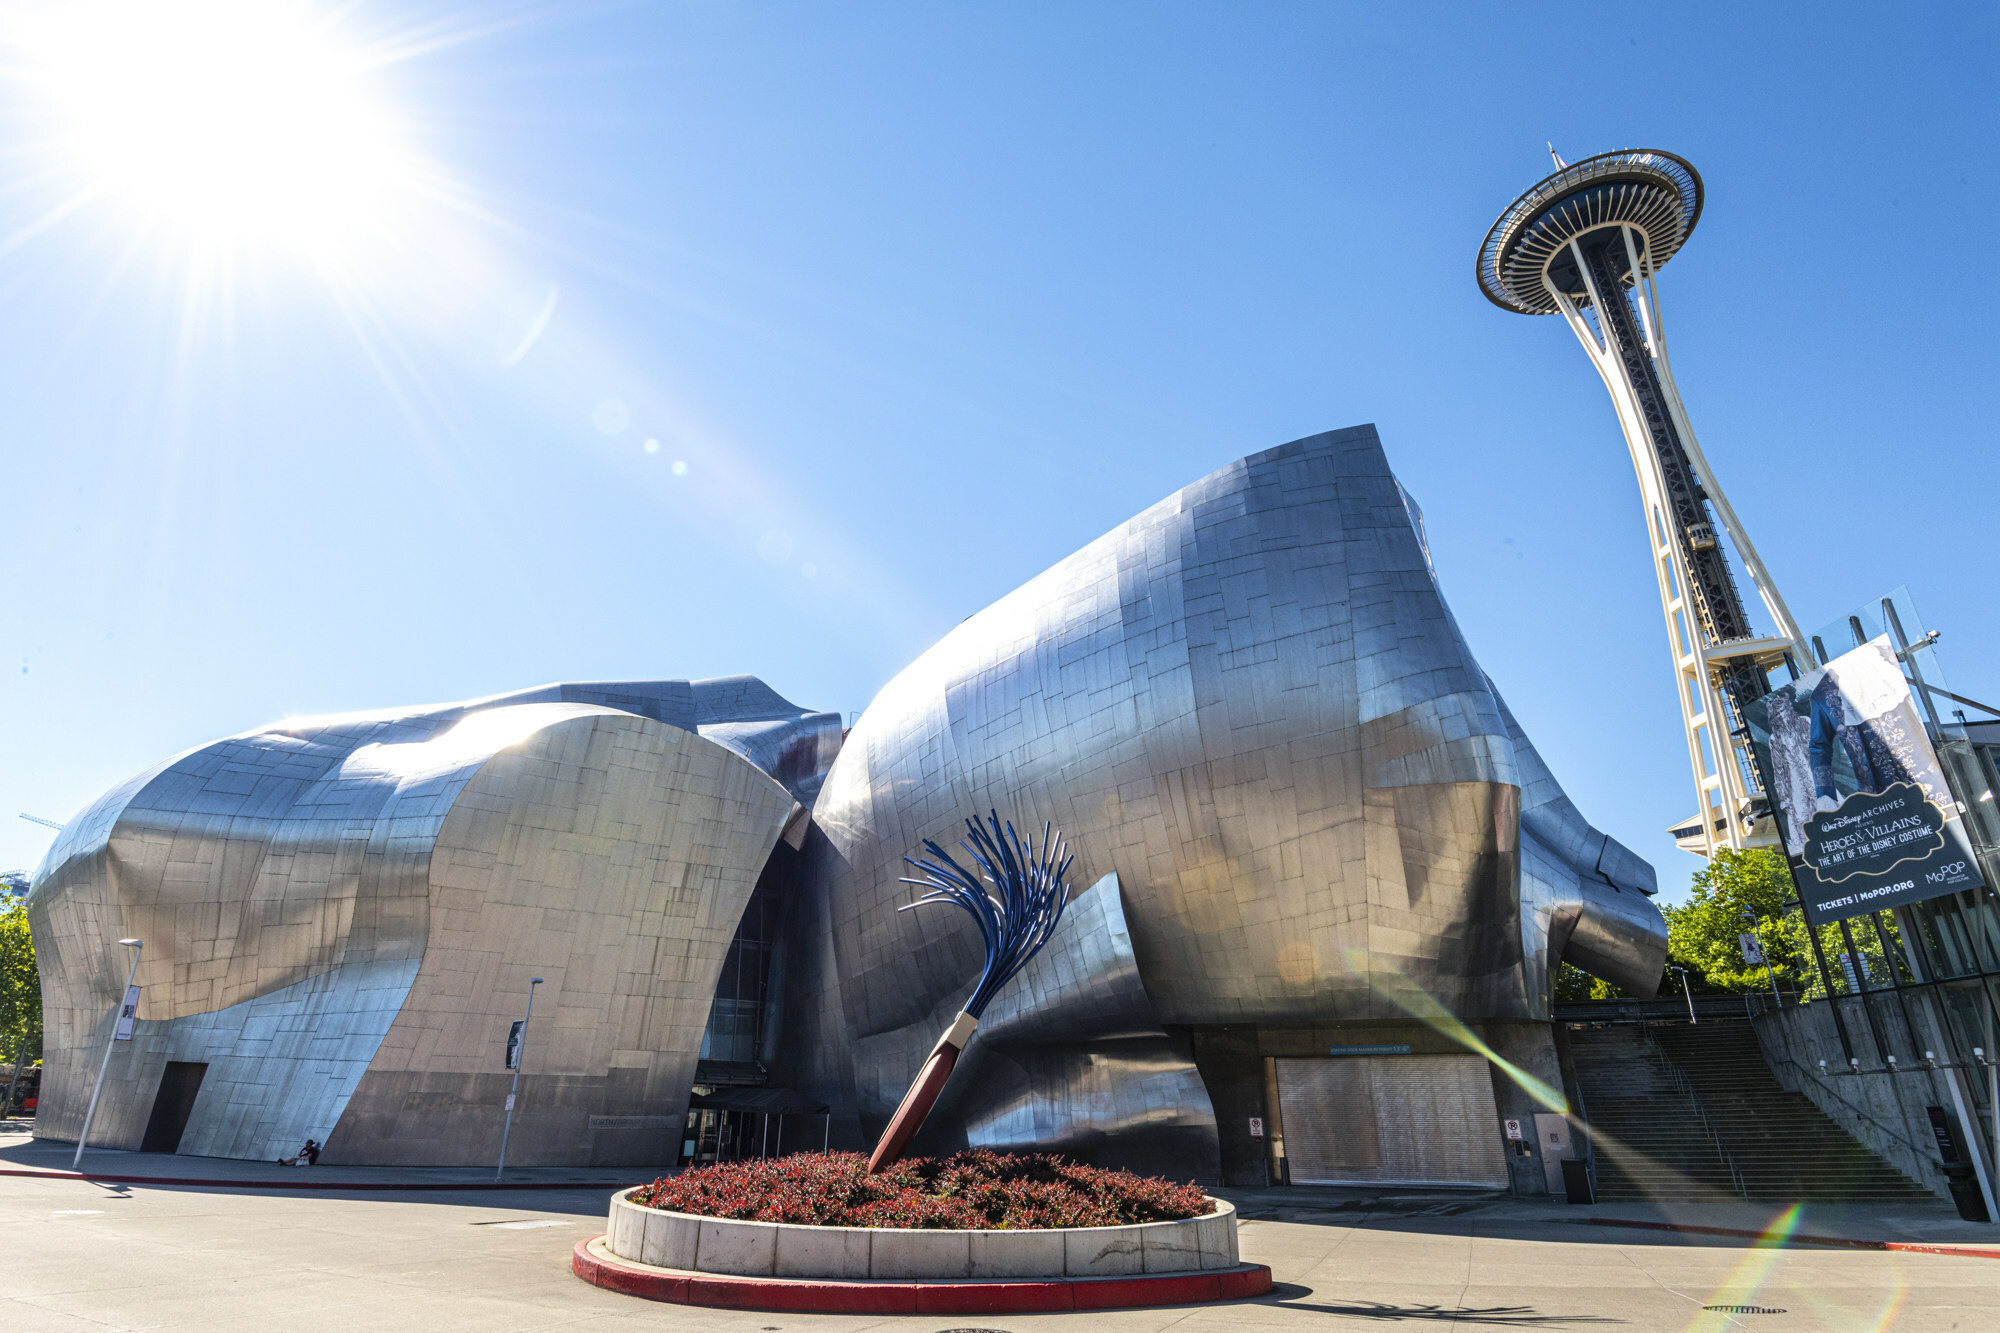 Seattle’s Museum of Pop Culture is a Must-See for visitors to the Emerald City